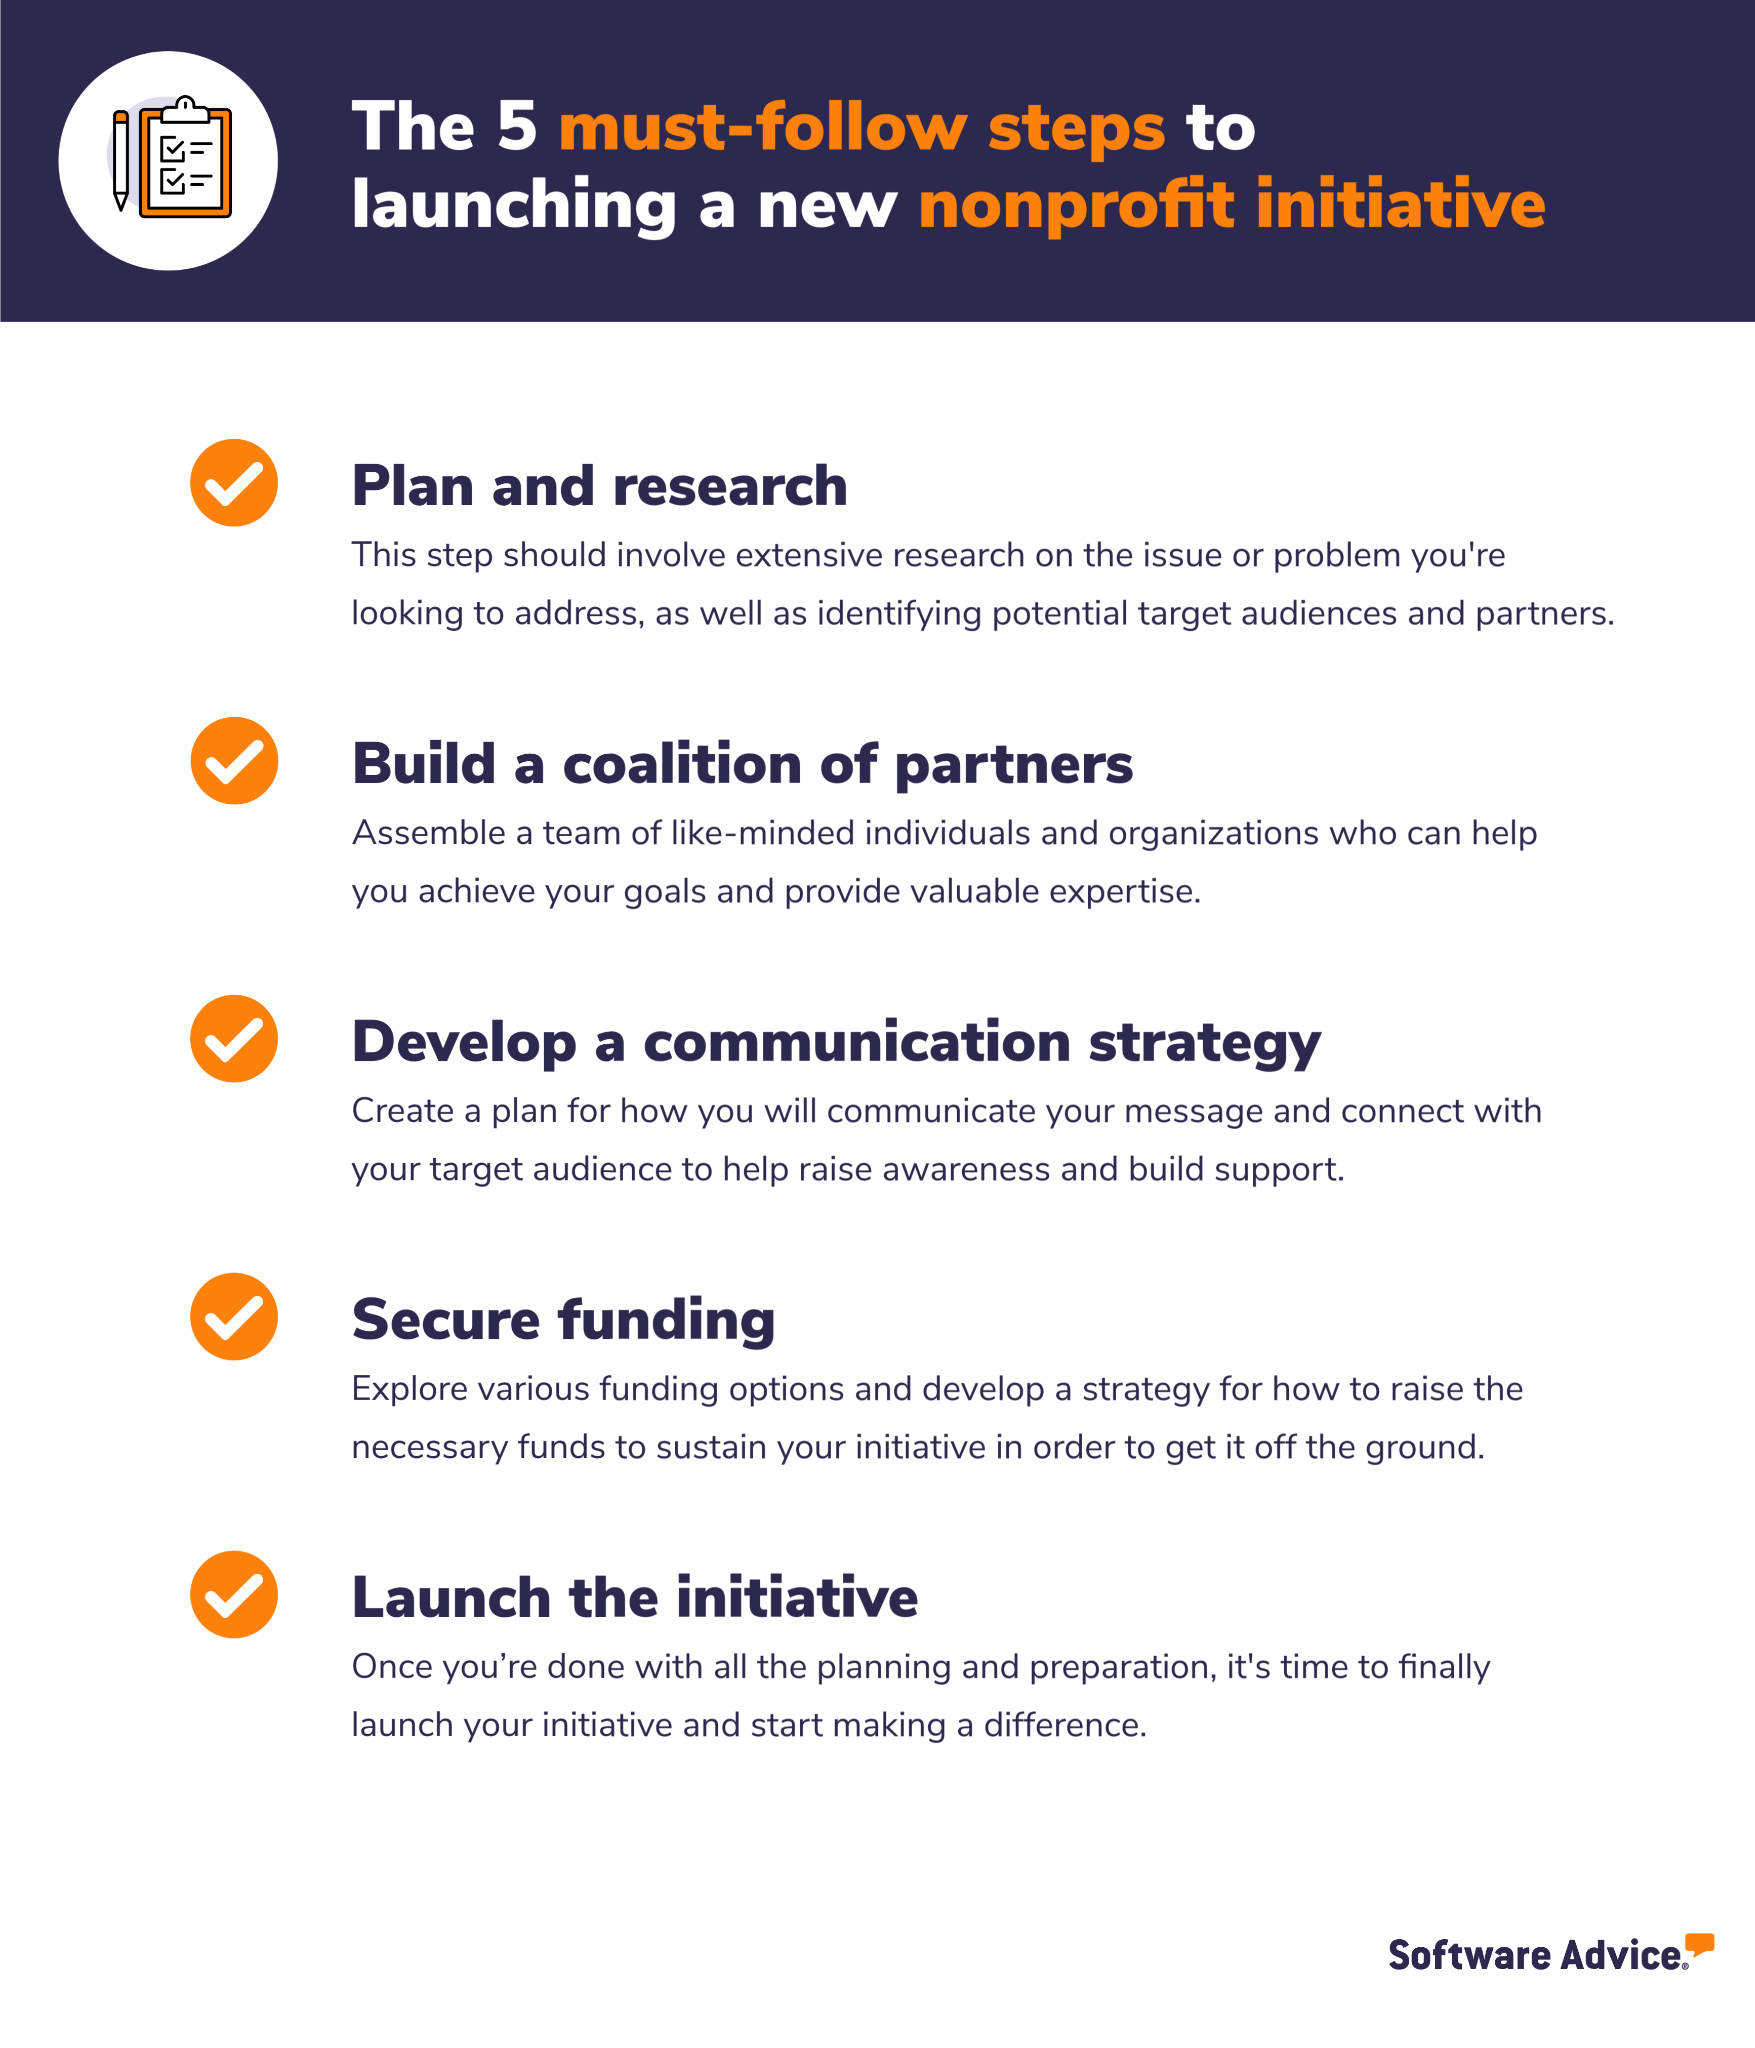 How-to-launch-a-new-nonprofit-initiative